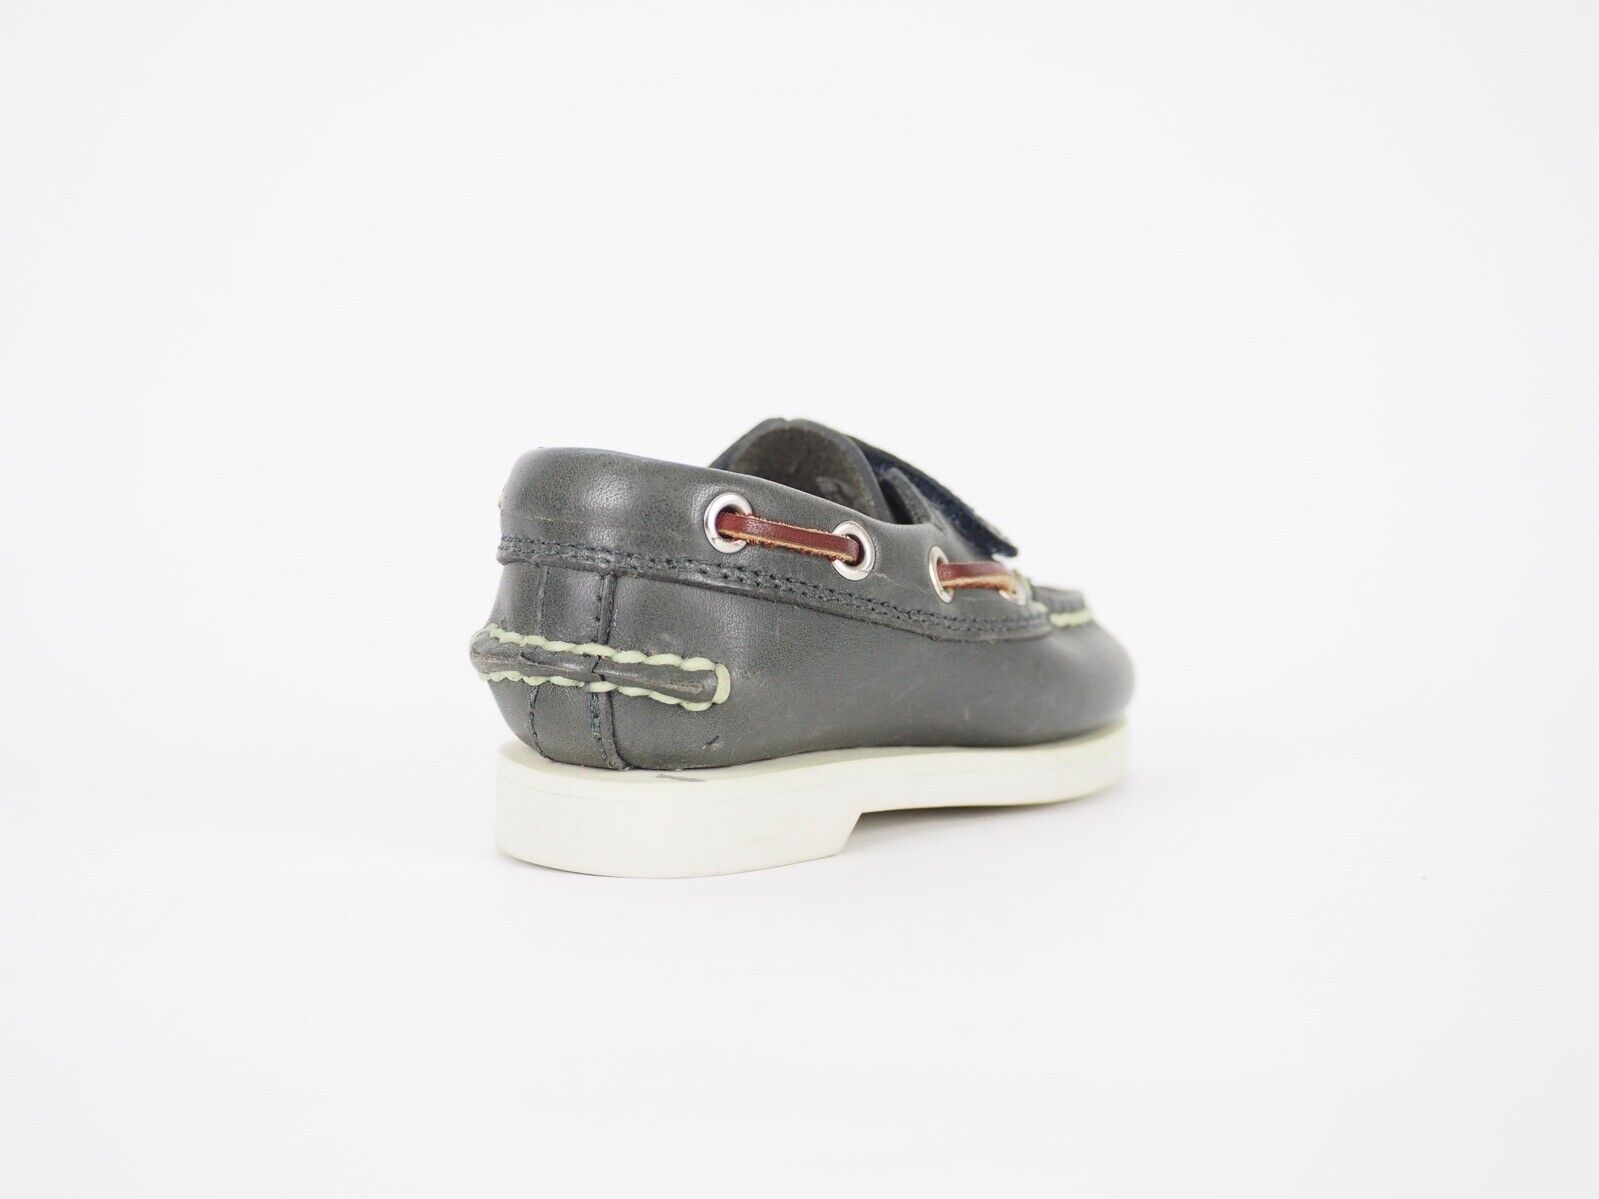 Boys Timberland Classic 25837 Grey Leather Toddlers Casual Strap Boat Shoes - London Top Style